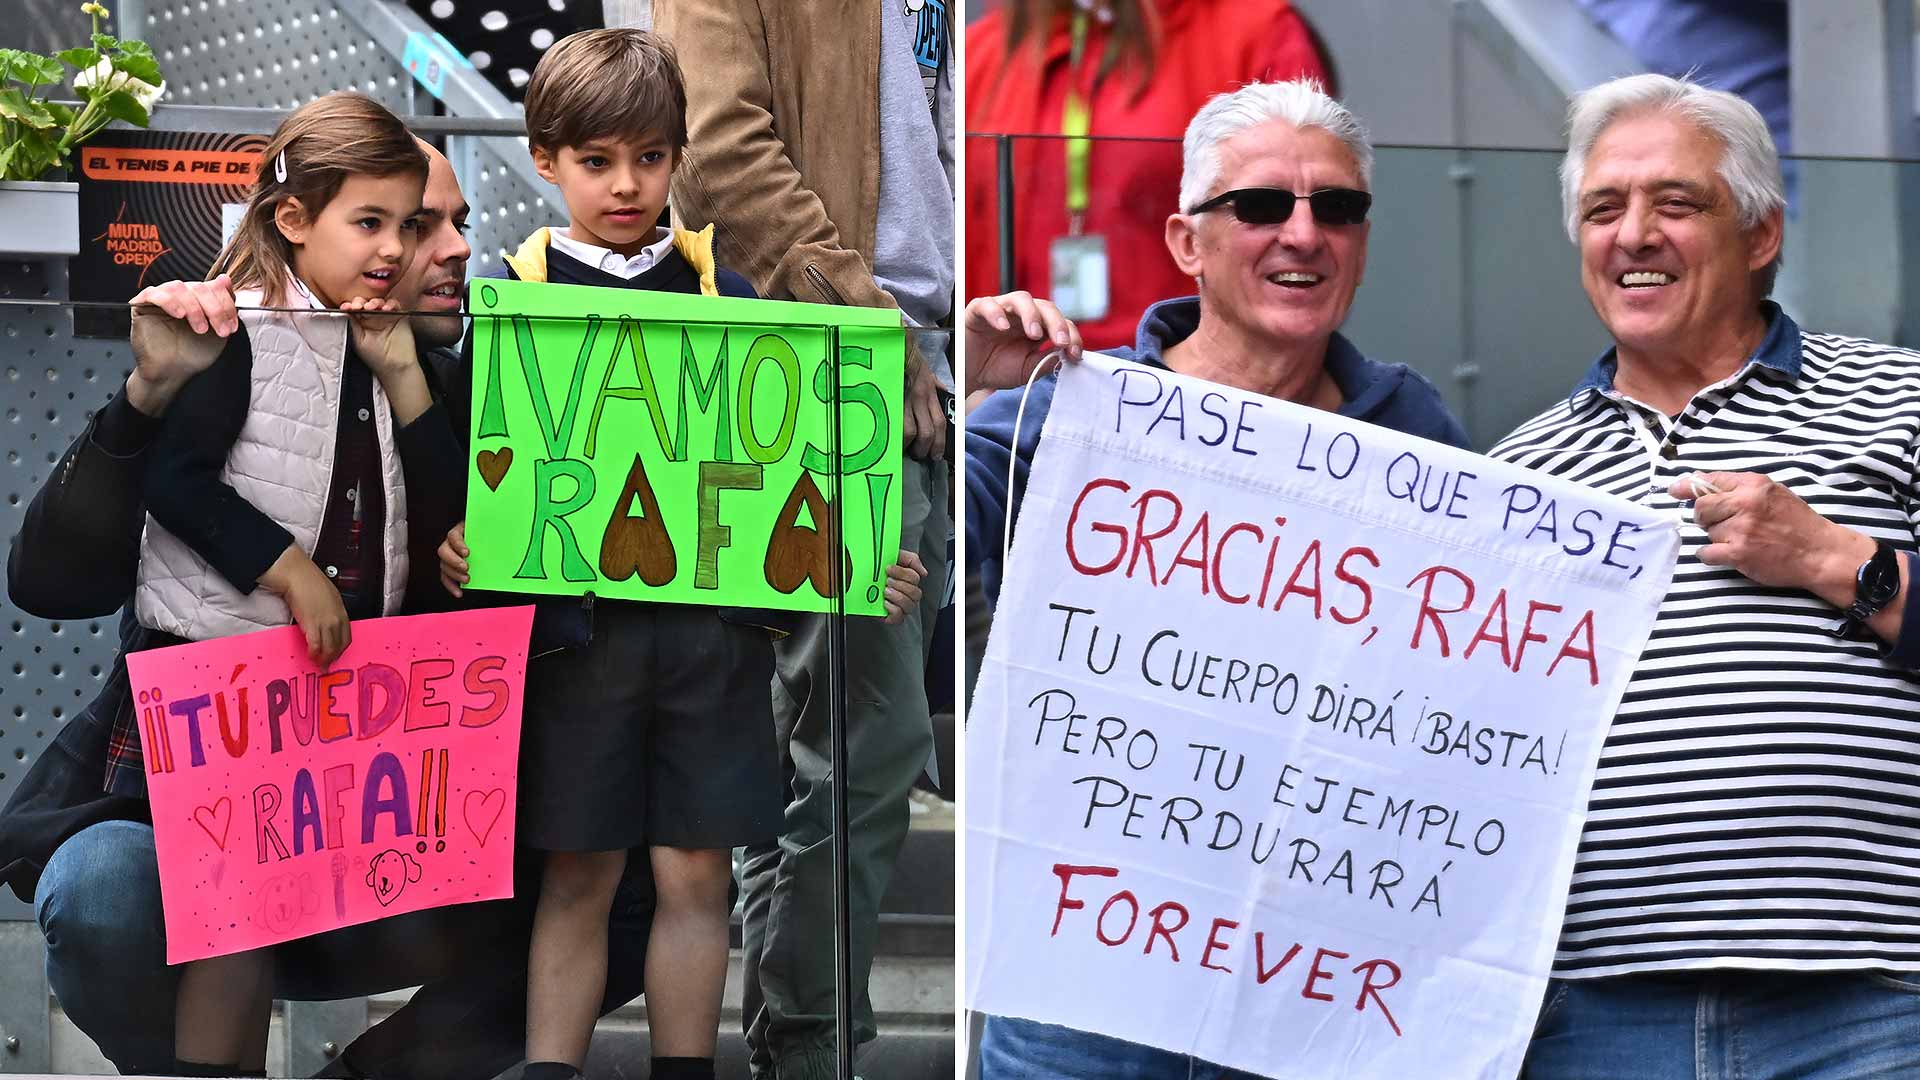 Fans of all ages show their support for Rafael Nadal in Madrid.